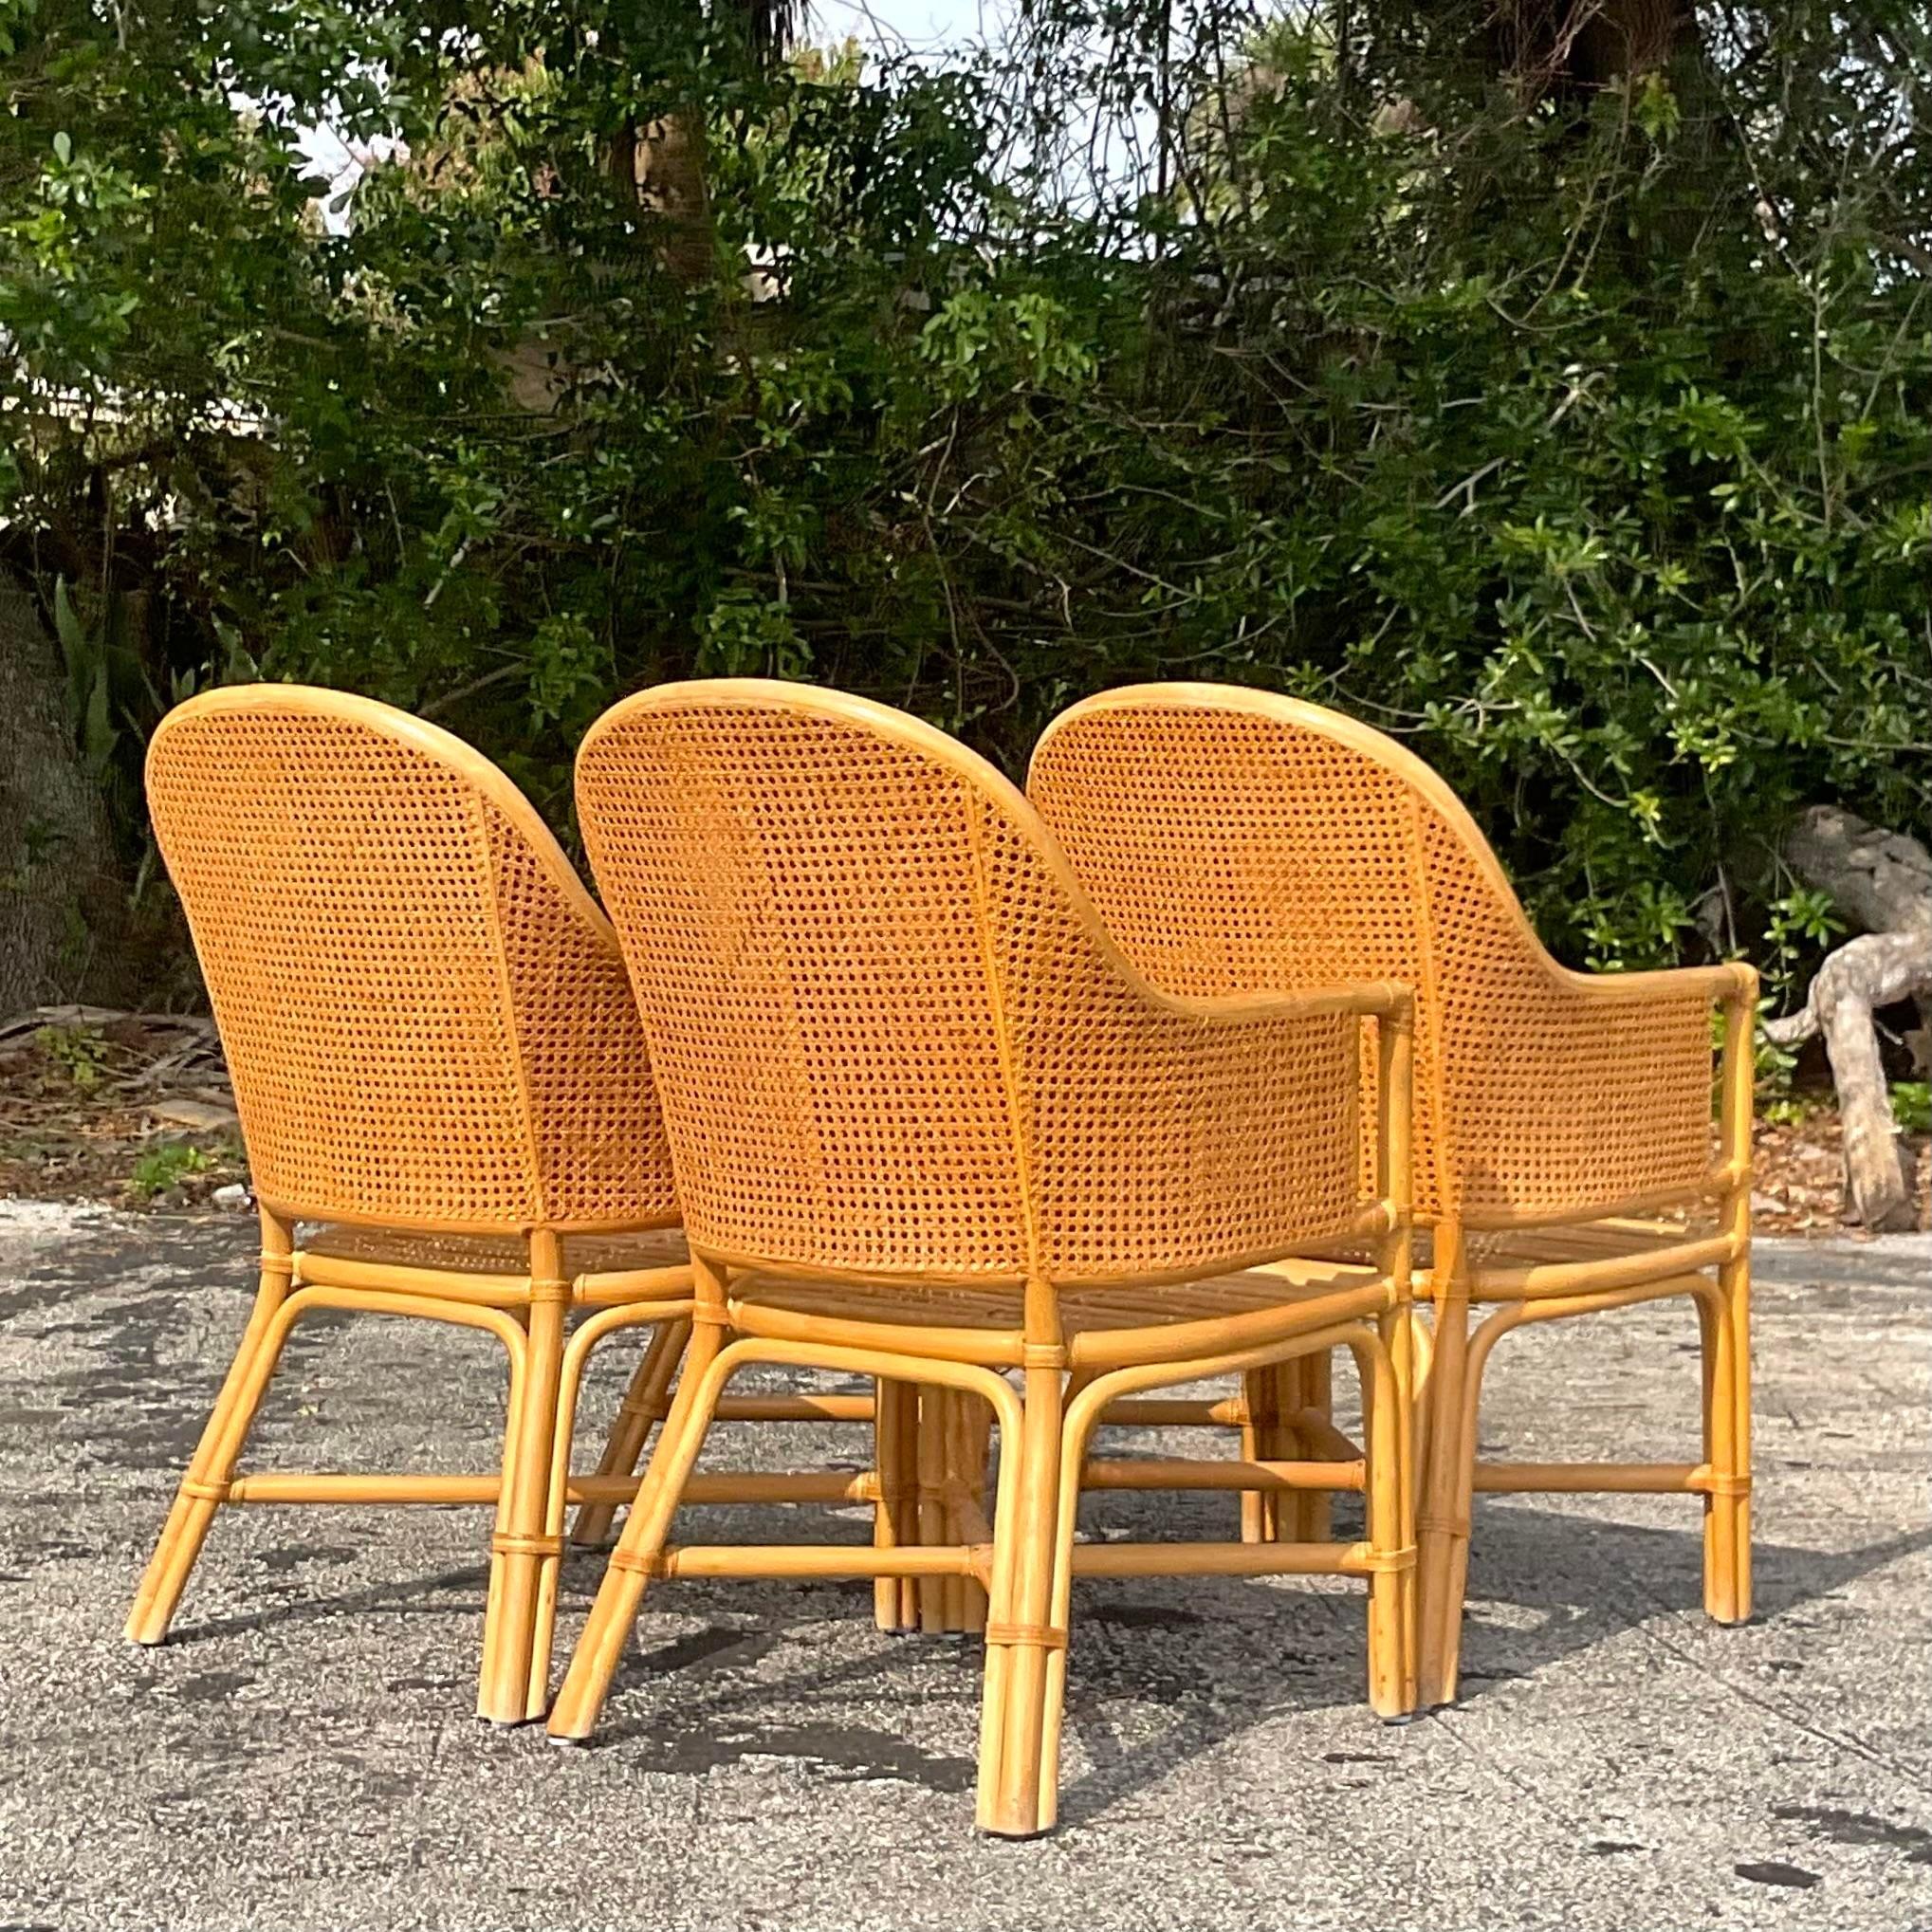 Embrace timeless coastal chic with this set of 4 vintage cane rattan dining chairs inspired by McGuire. Crafted for both style and durability, these chairs exude a breezy elegance that epitomizes seaside living. With their classic design and sturdy